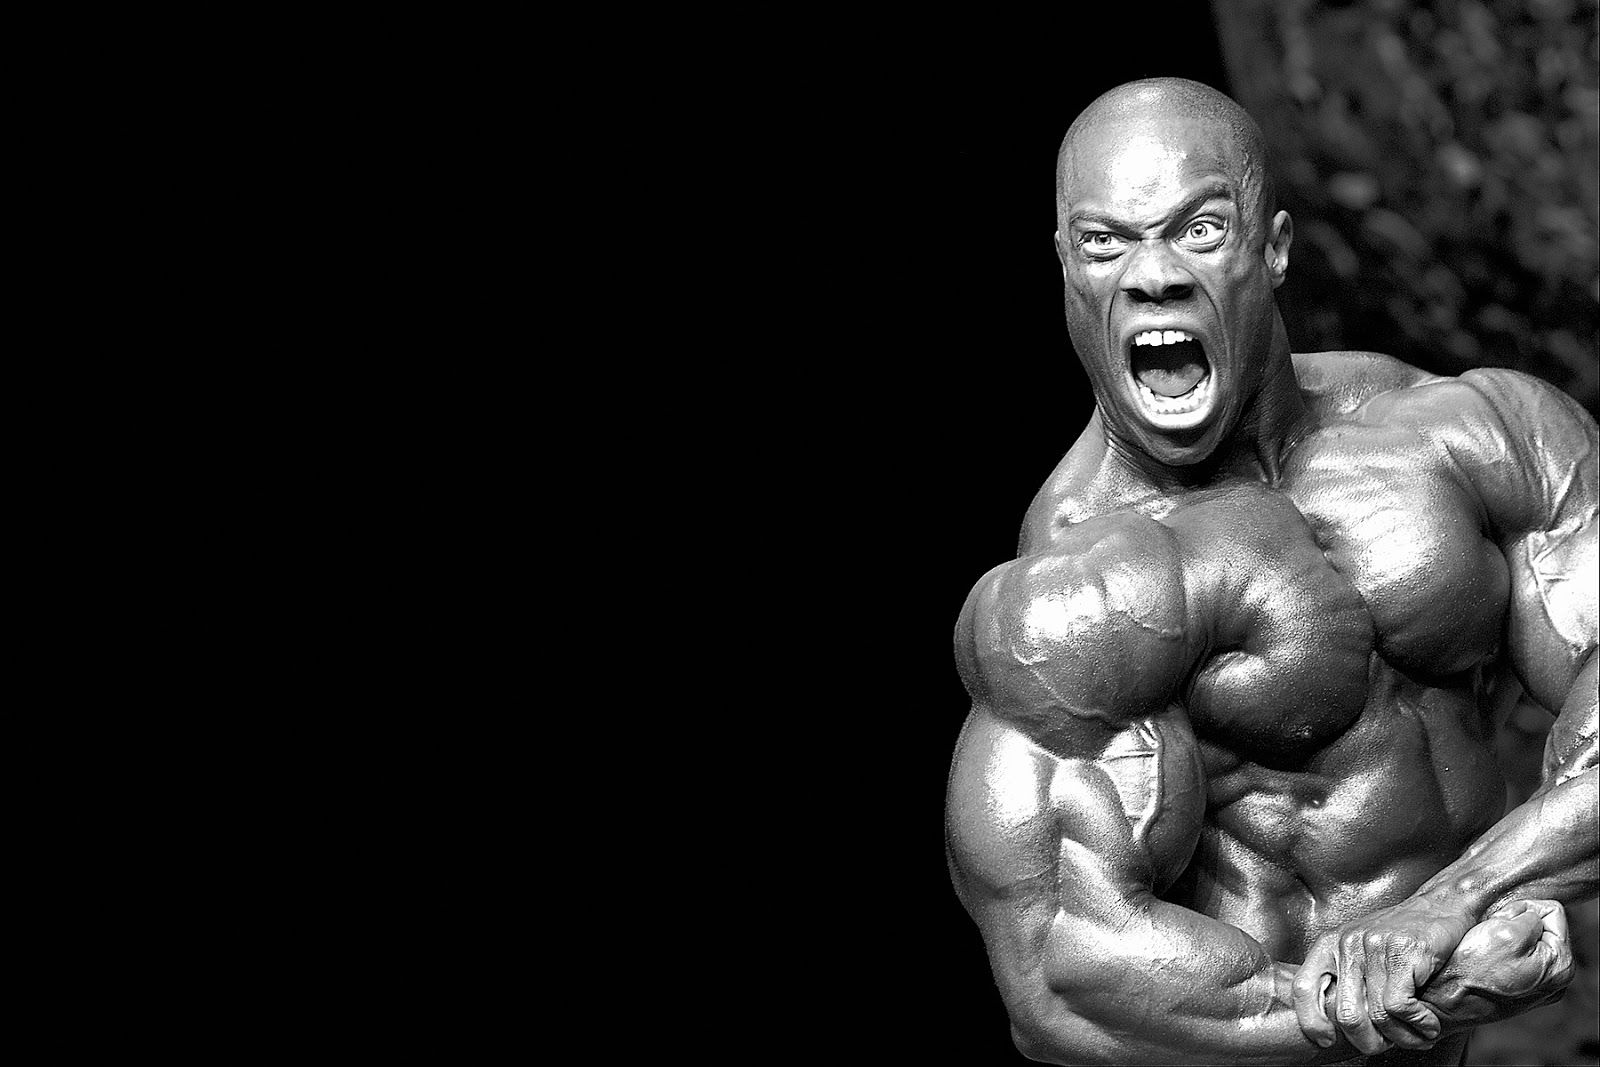 Phil Heath mr Olympia, HD Wallpapers 2013 ~ All About HD Wallpapers